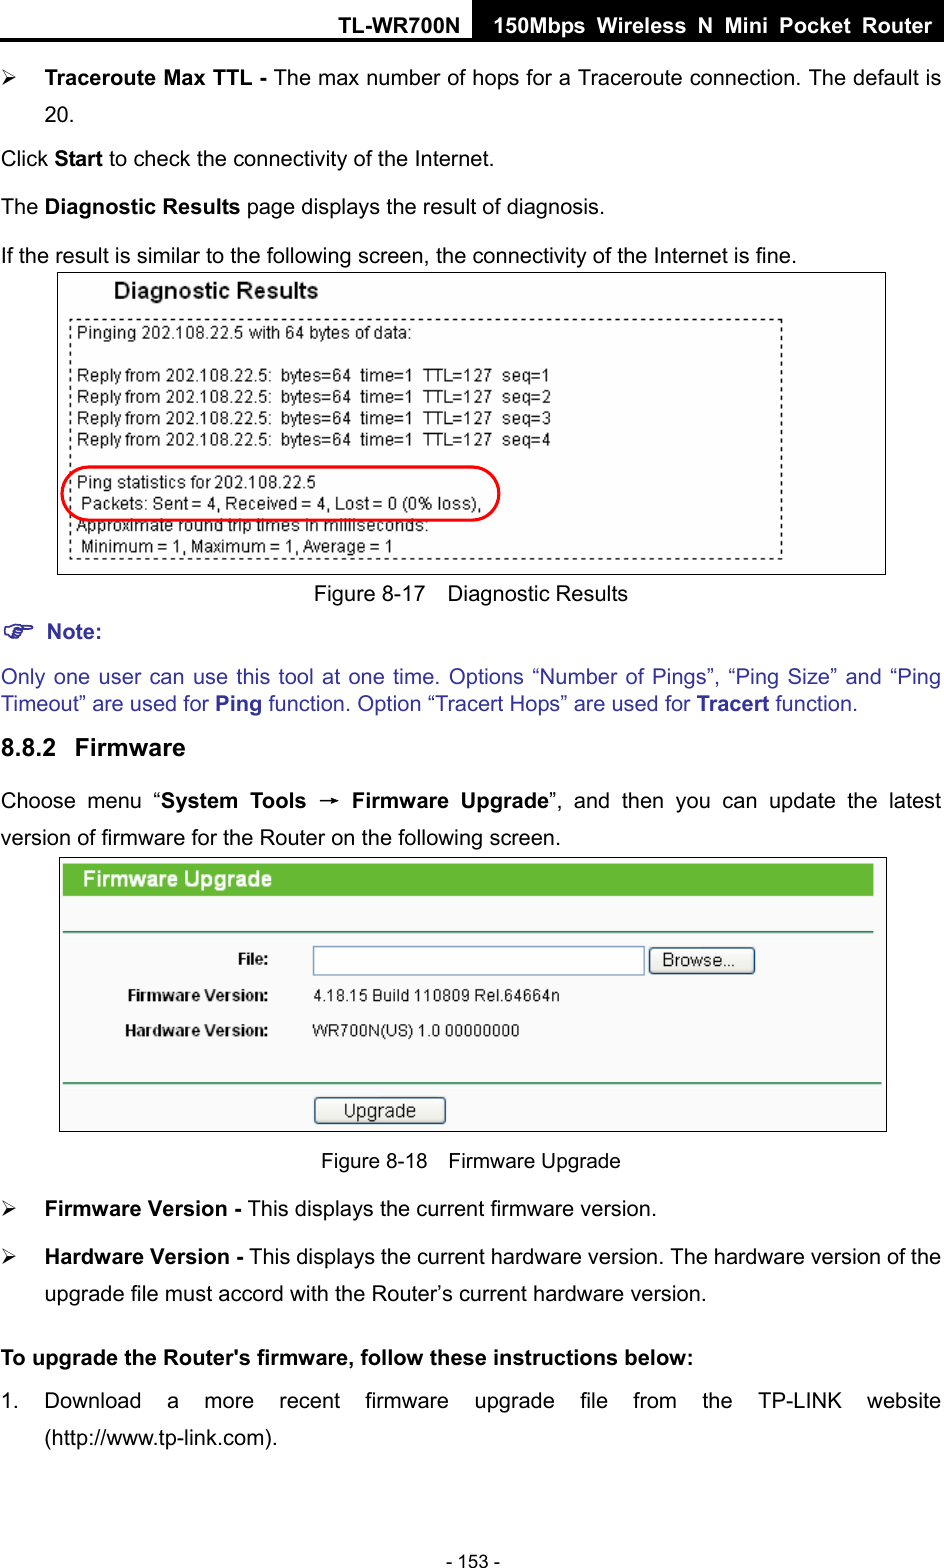 TL-WR700N 150Mbps Wireless N Mini Pocket Router - 153 - ¾ Traceroute Max TTL - The max number of hops for a Traceroute connection. The default is 20. Click Start to check the connectivity of the Internet.   The Diagnostic Results page displays the result of diagnosis. If the result is similar to the following screen, the connectivity of the Internet is fine.  Figure 8-17  Diagnostic Results ) Note: Only one user can use this tool at one time. Options “Number of Pings”, “Ping Size” and “Ping Timeout” are used for Ping function. Option “Tracert Hops” are used for Tracert function. 8.8.2  Firmware Choose menu “System Tools → Firmware Upgrade”, and then you can update the latest version of firmware for the Router on the following screen.  Figure 8-18  Firmware Upgrade ¾ Firmware Version - This displays the current firmware version. ¾ Hardware Version - This displays the current hardware version. The hardware version of the upgrade file must accord with the Router’s current hardware version. To upgrade the Router&apos;s firmware, follow these instructions below: 1. Download a more recent firmware upgrade file from the TP-LINK website (http://www.tp-link.com).  